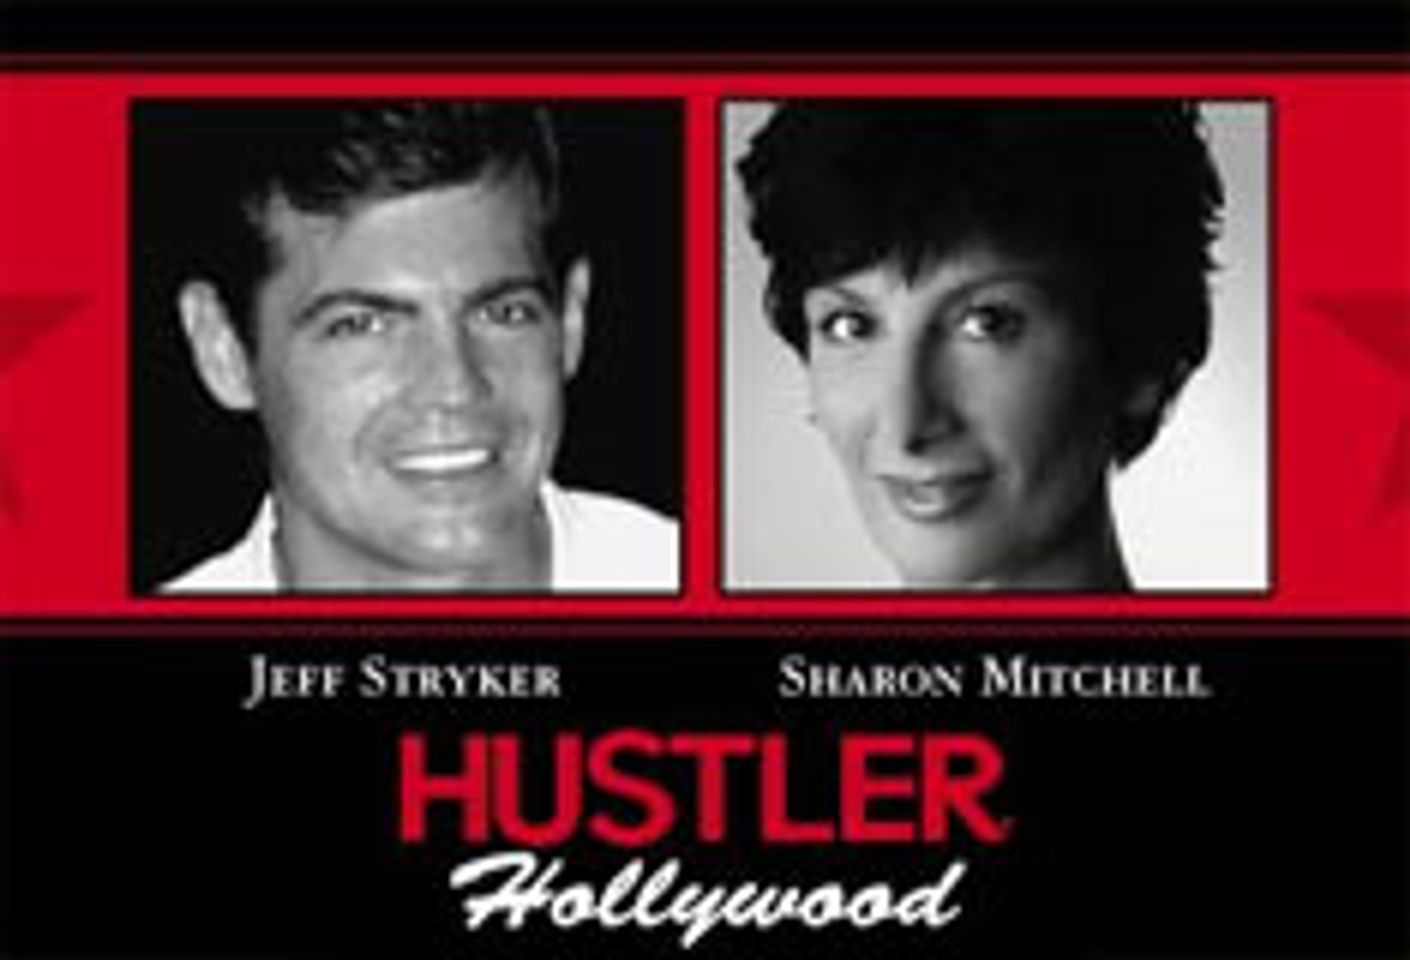 Sharon Mitchell and Jeff Stryker to be Inducted into Hustler Hollywood Porn Walk of Fame